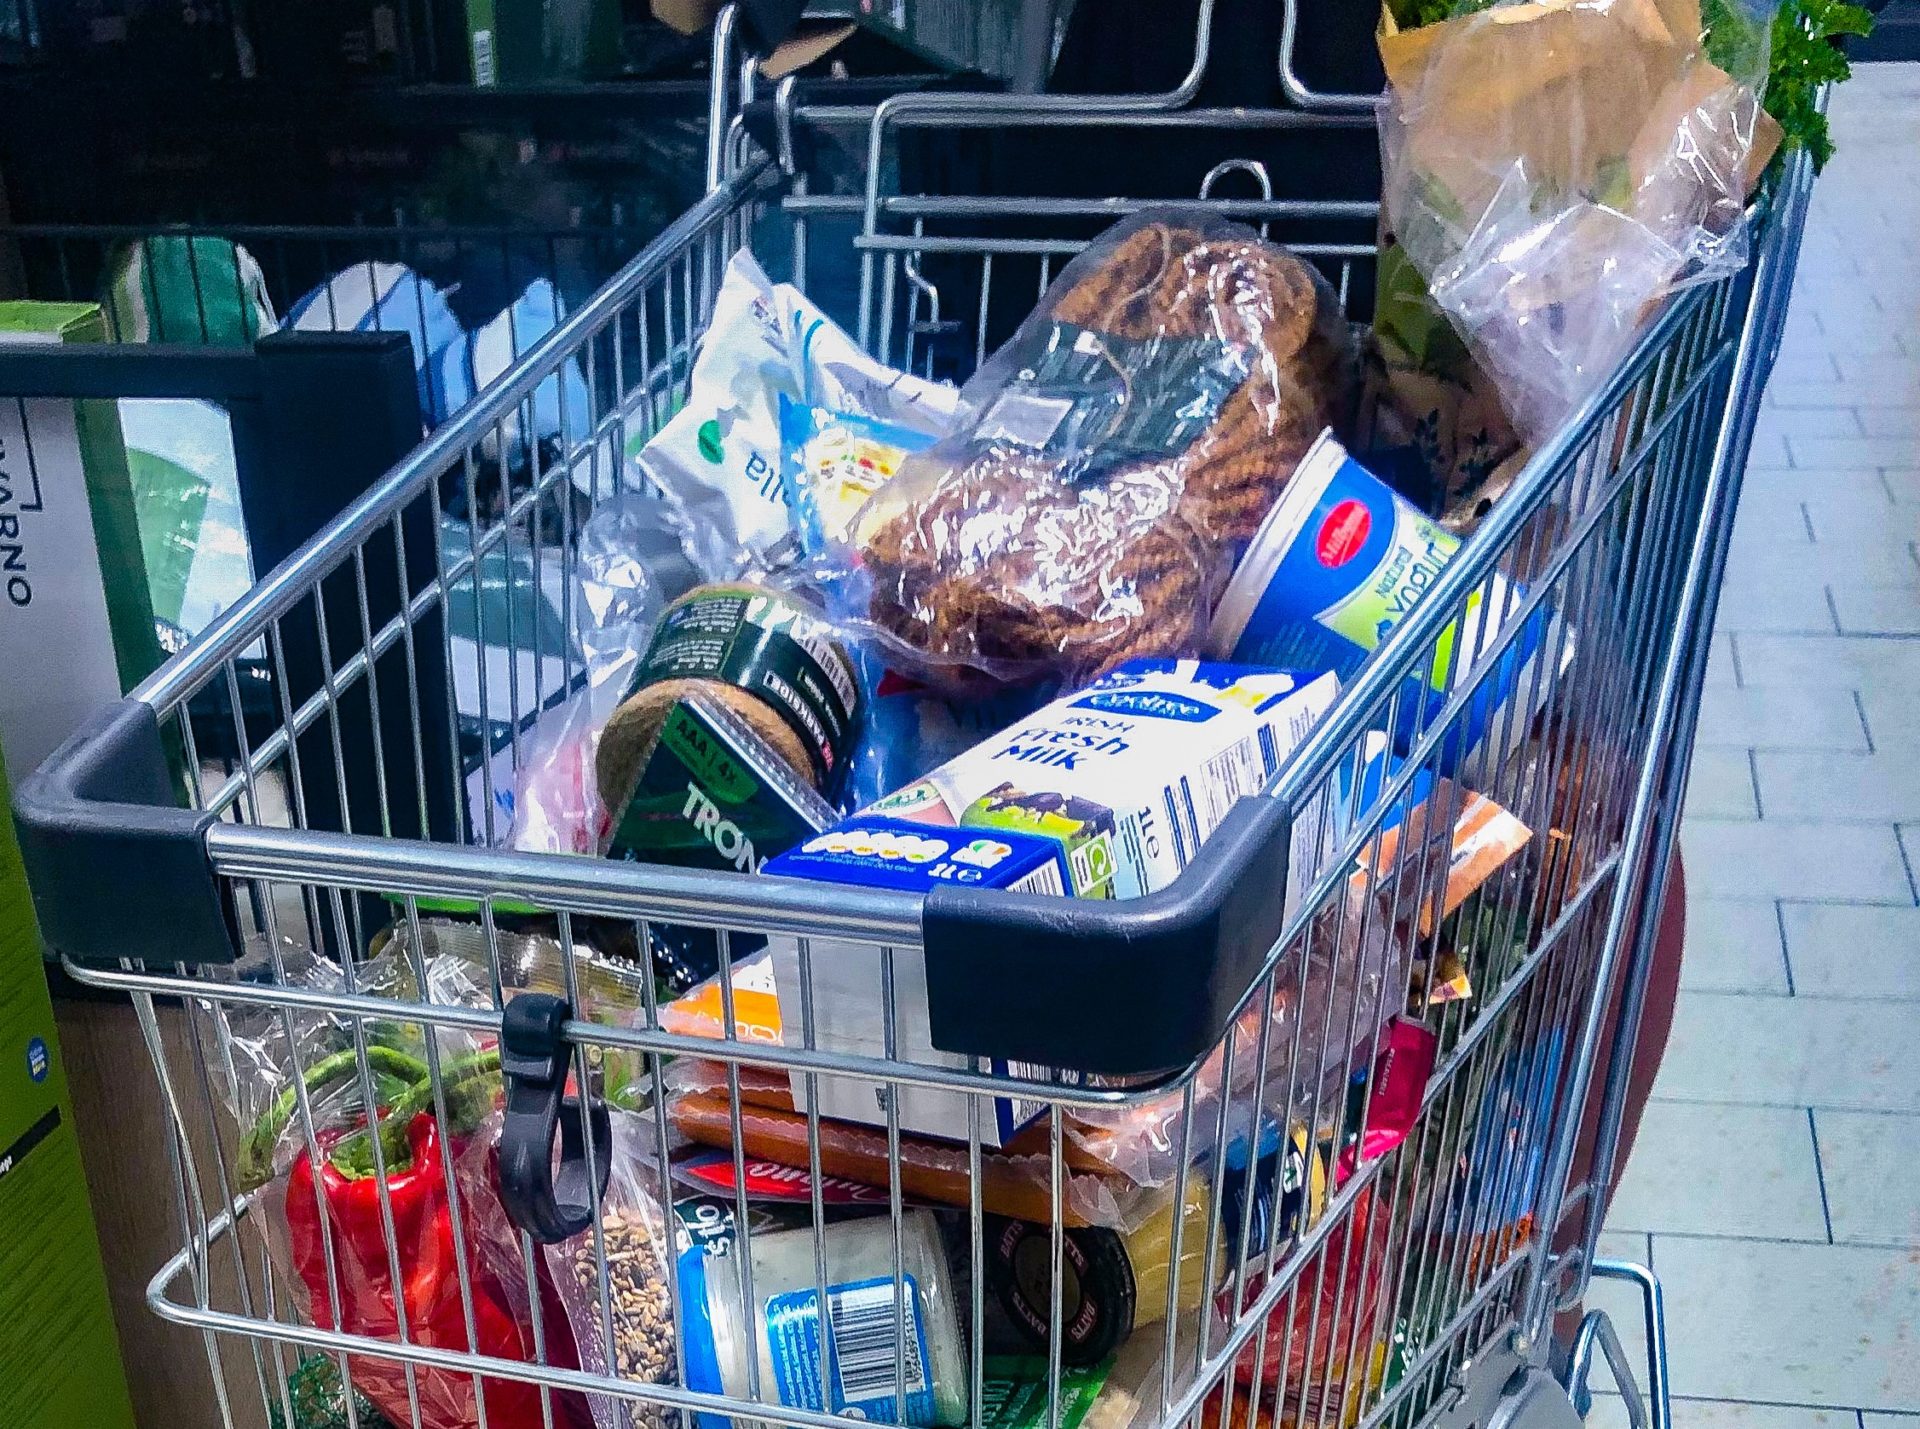 A shopping trolley full of groceries in a Lidl supermarket.